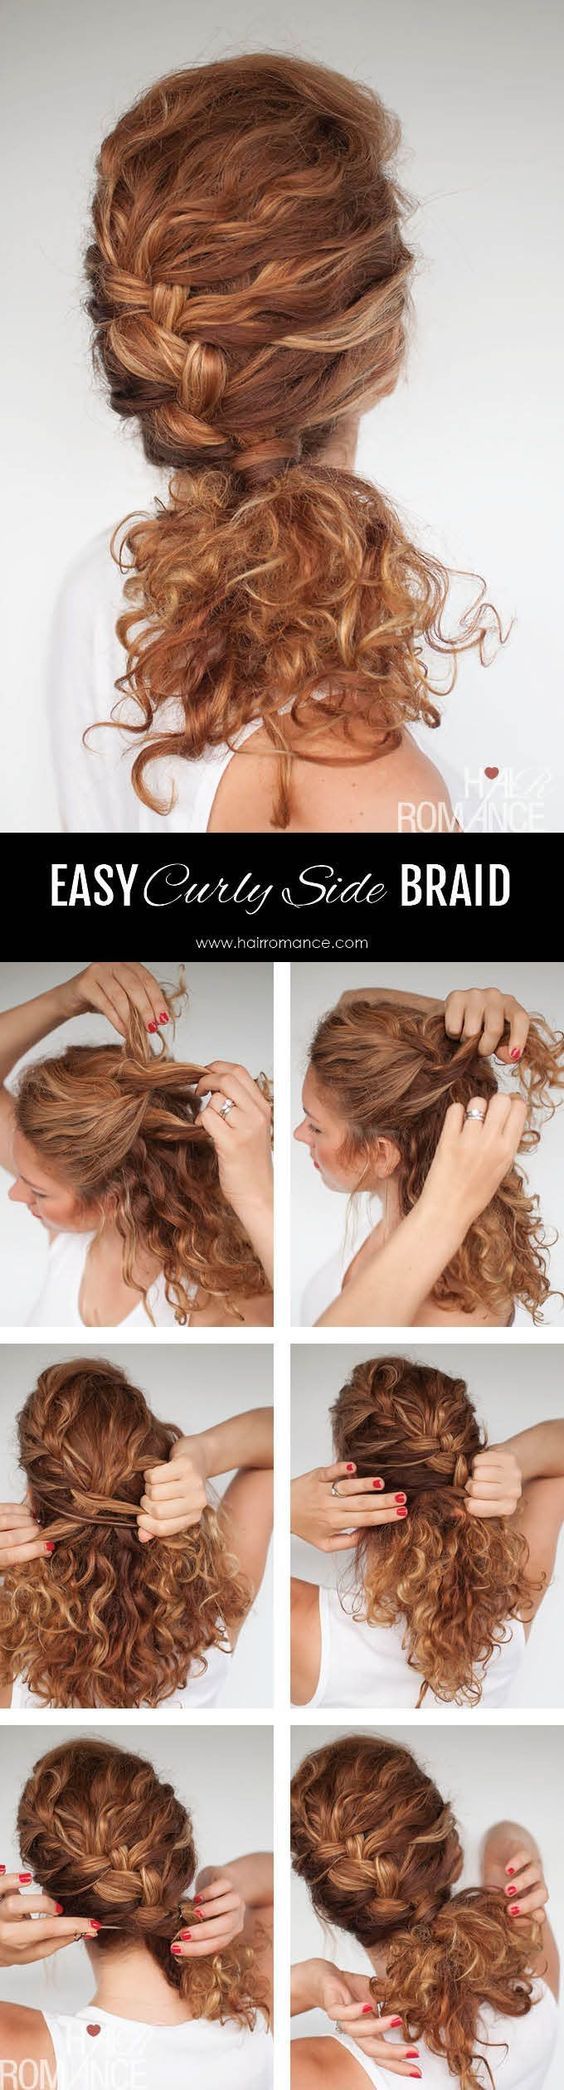 Hair Romance – Easy everyday curly hairstyle tutorials – the curly side braid